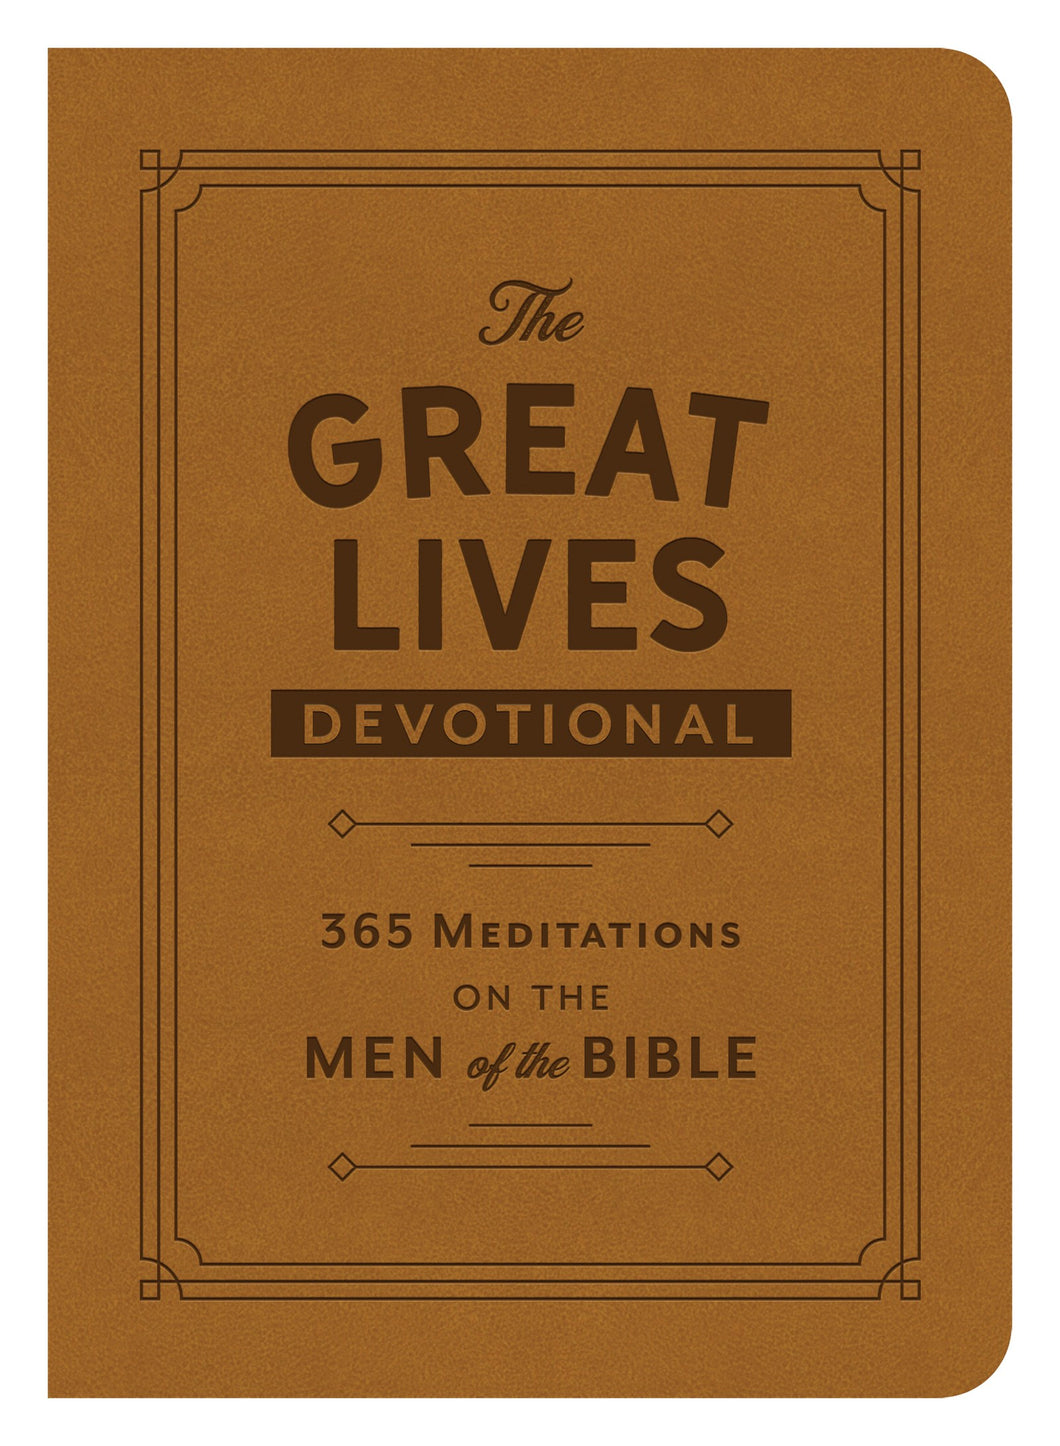 The Great Lives Devotional